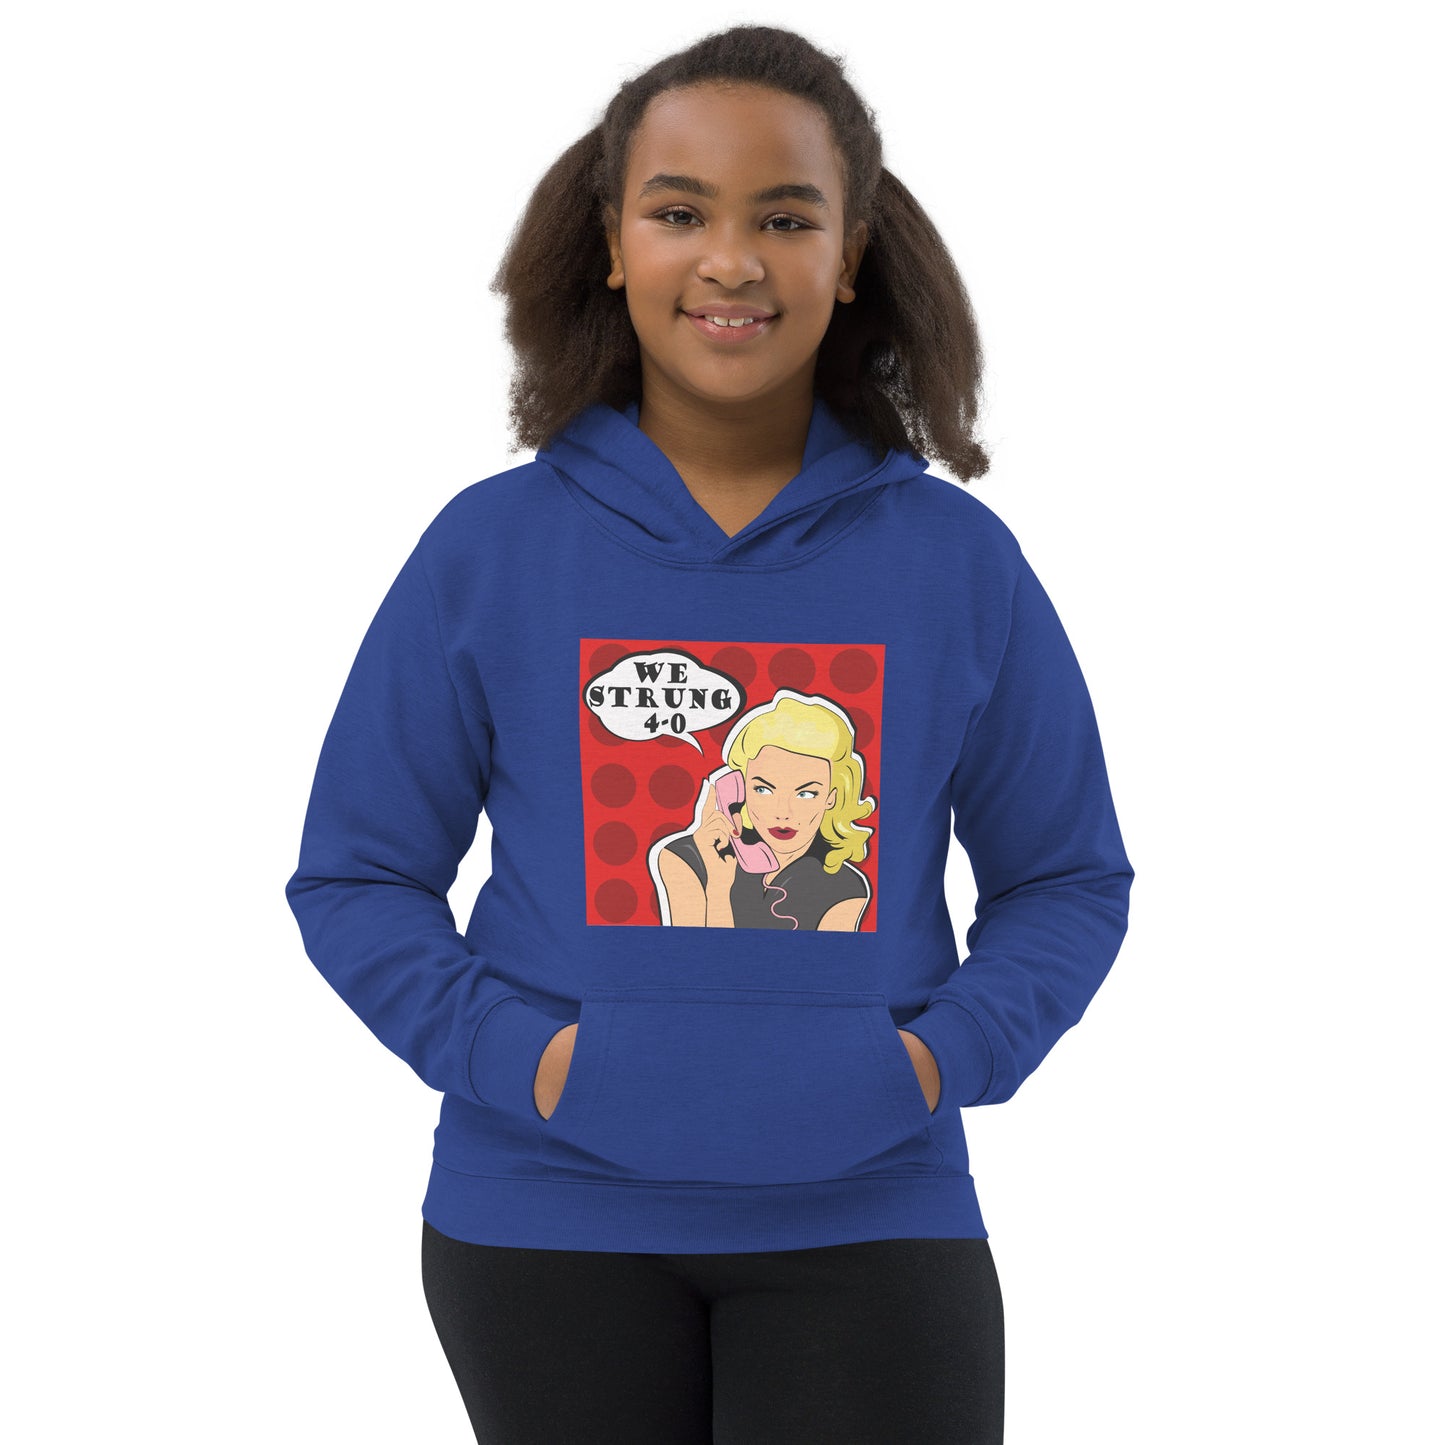 Youth COMIC STRUNG 4-0 Gamefowl Rooster Hoodie